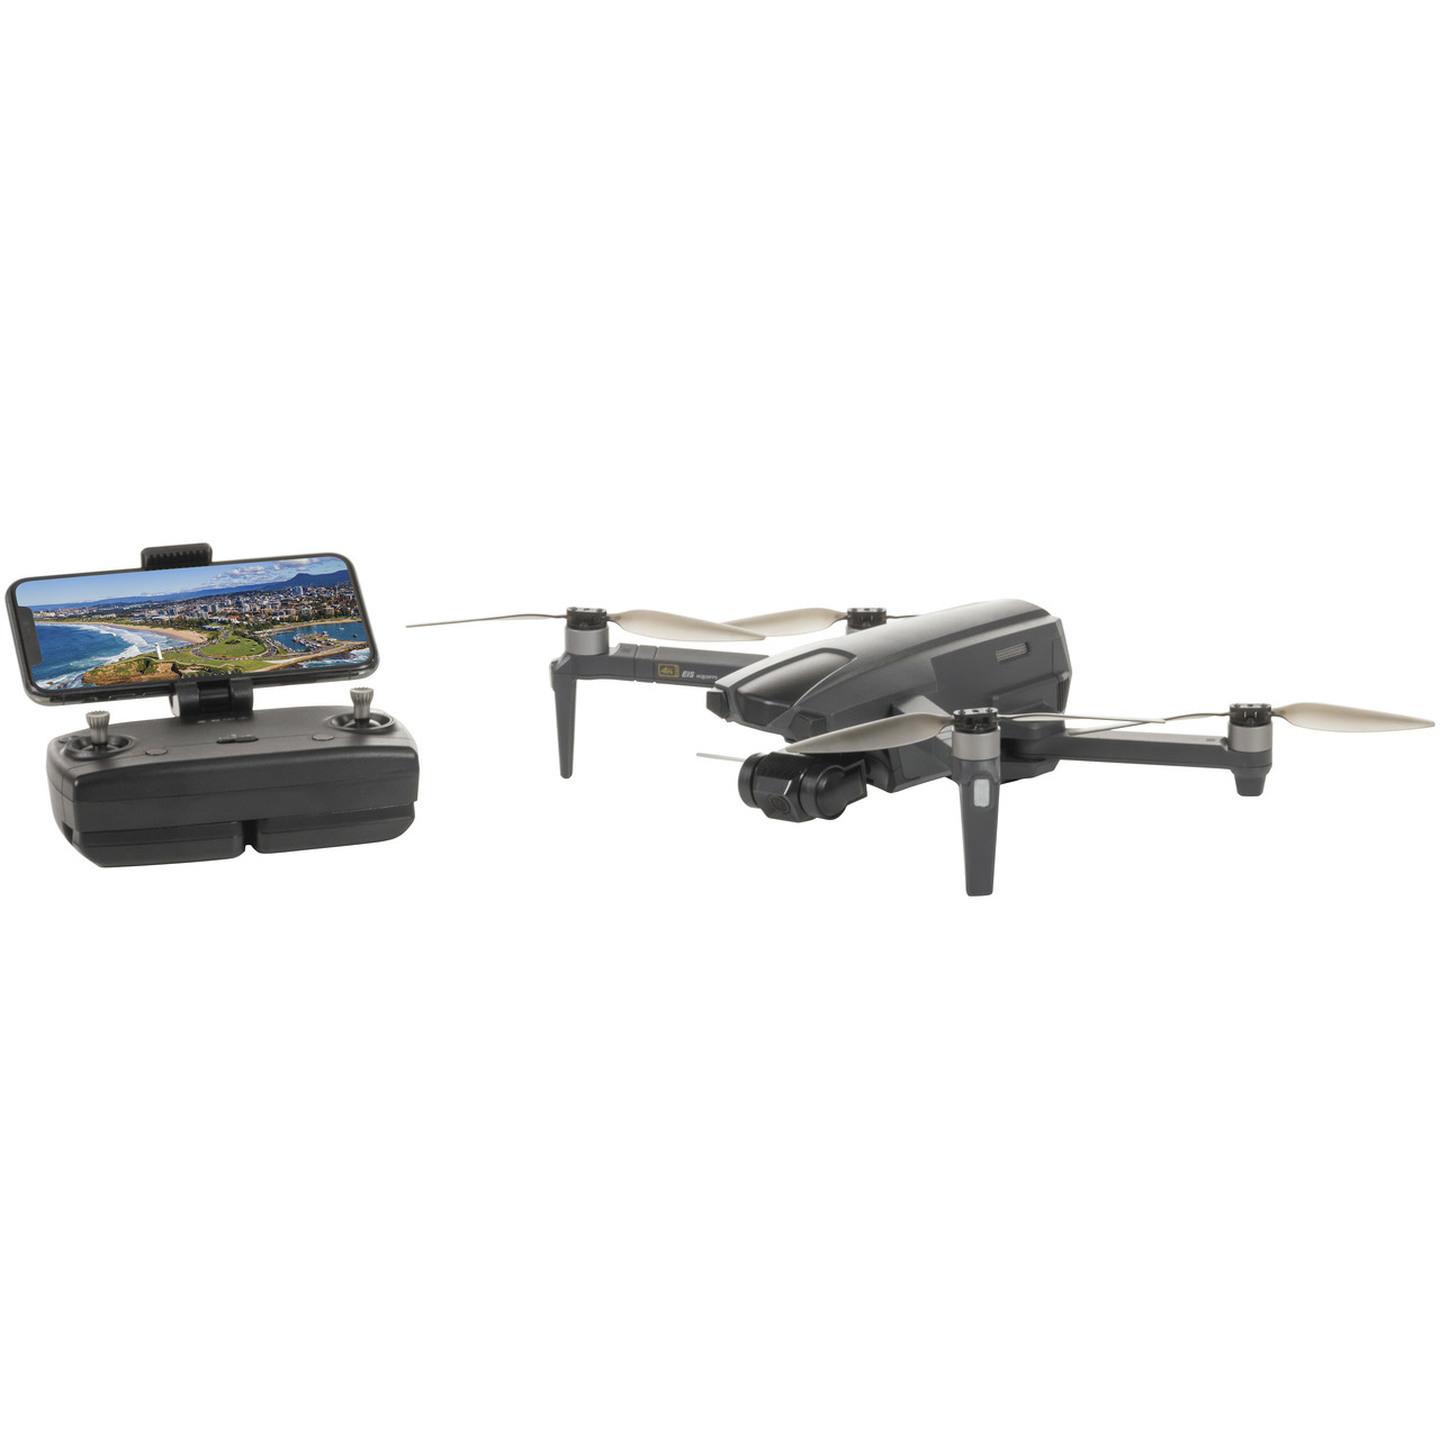 Bugs R/C Foldable Drone with 4K 3-Axis Gimbal Camera